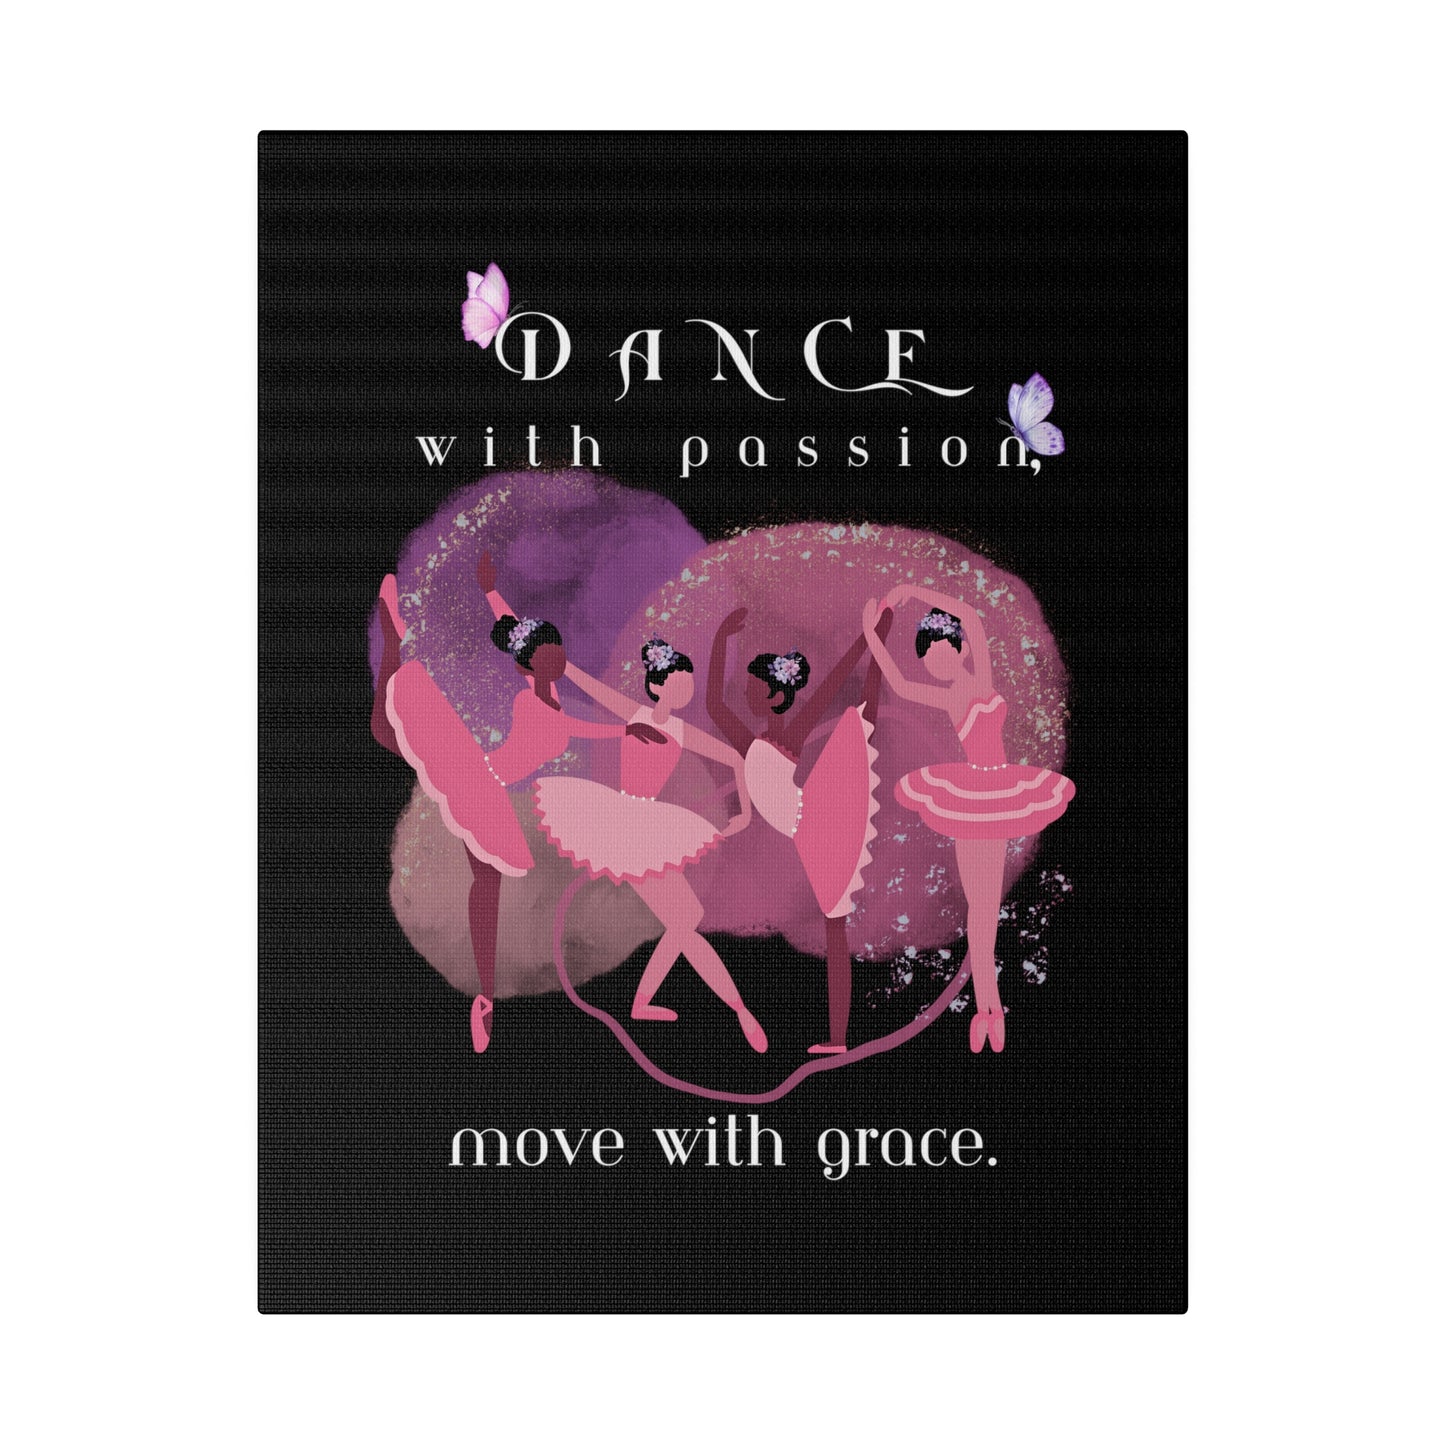 Canvas, Stretched, 0.75" - Dance with Passion (black background)